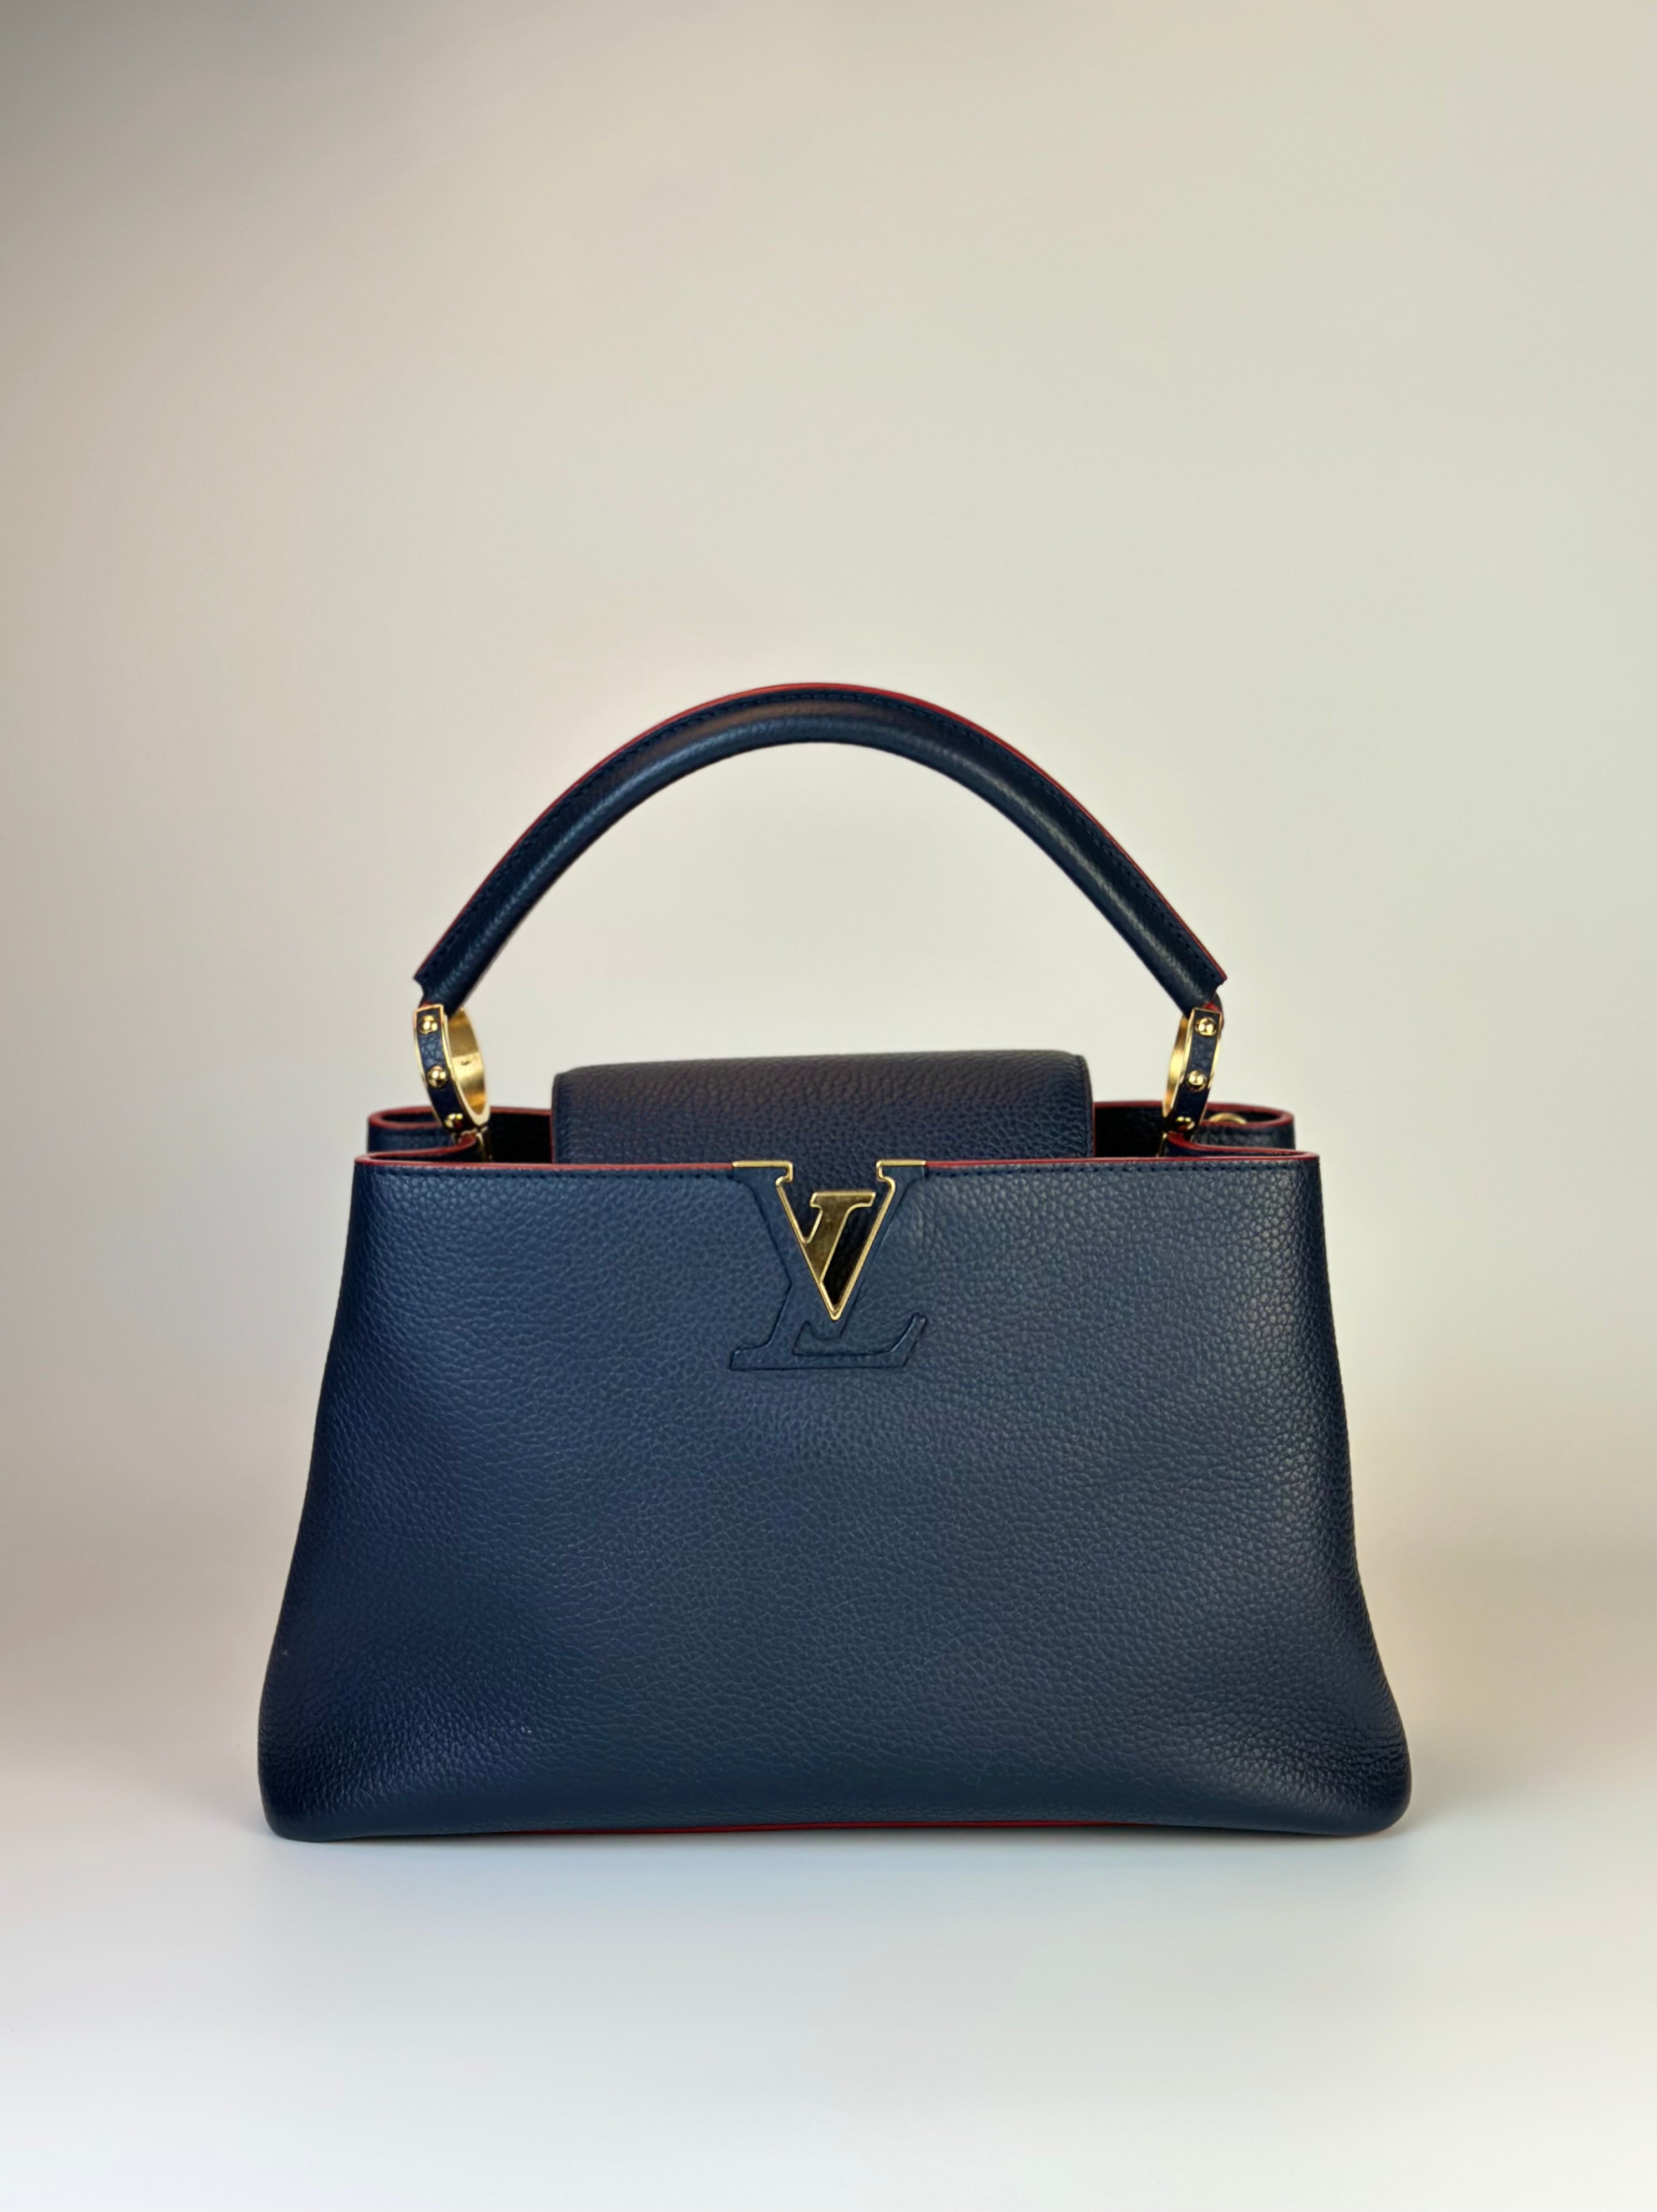 LOUIS VUITTON CAPUCCINES MM BAG in Navy Blue and Red Finishing